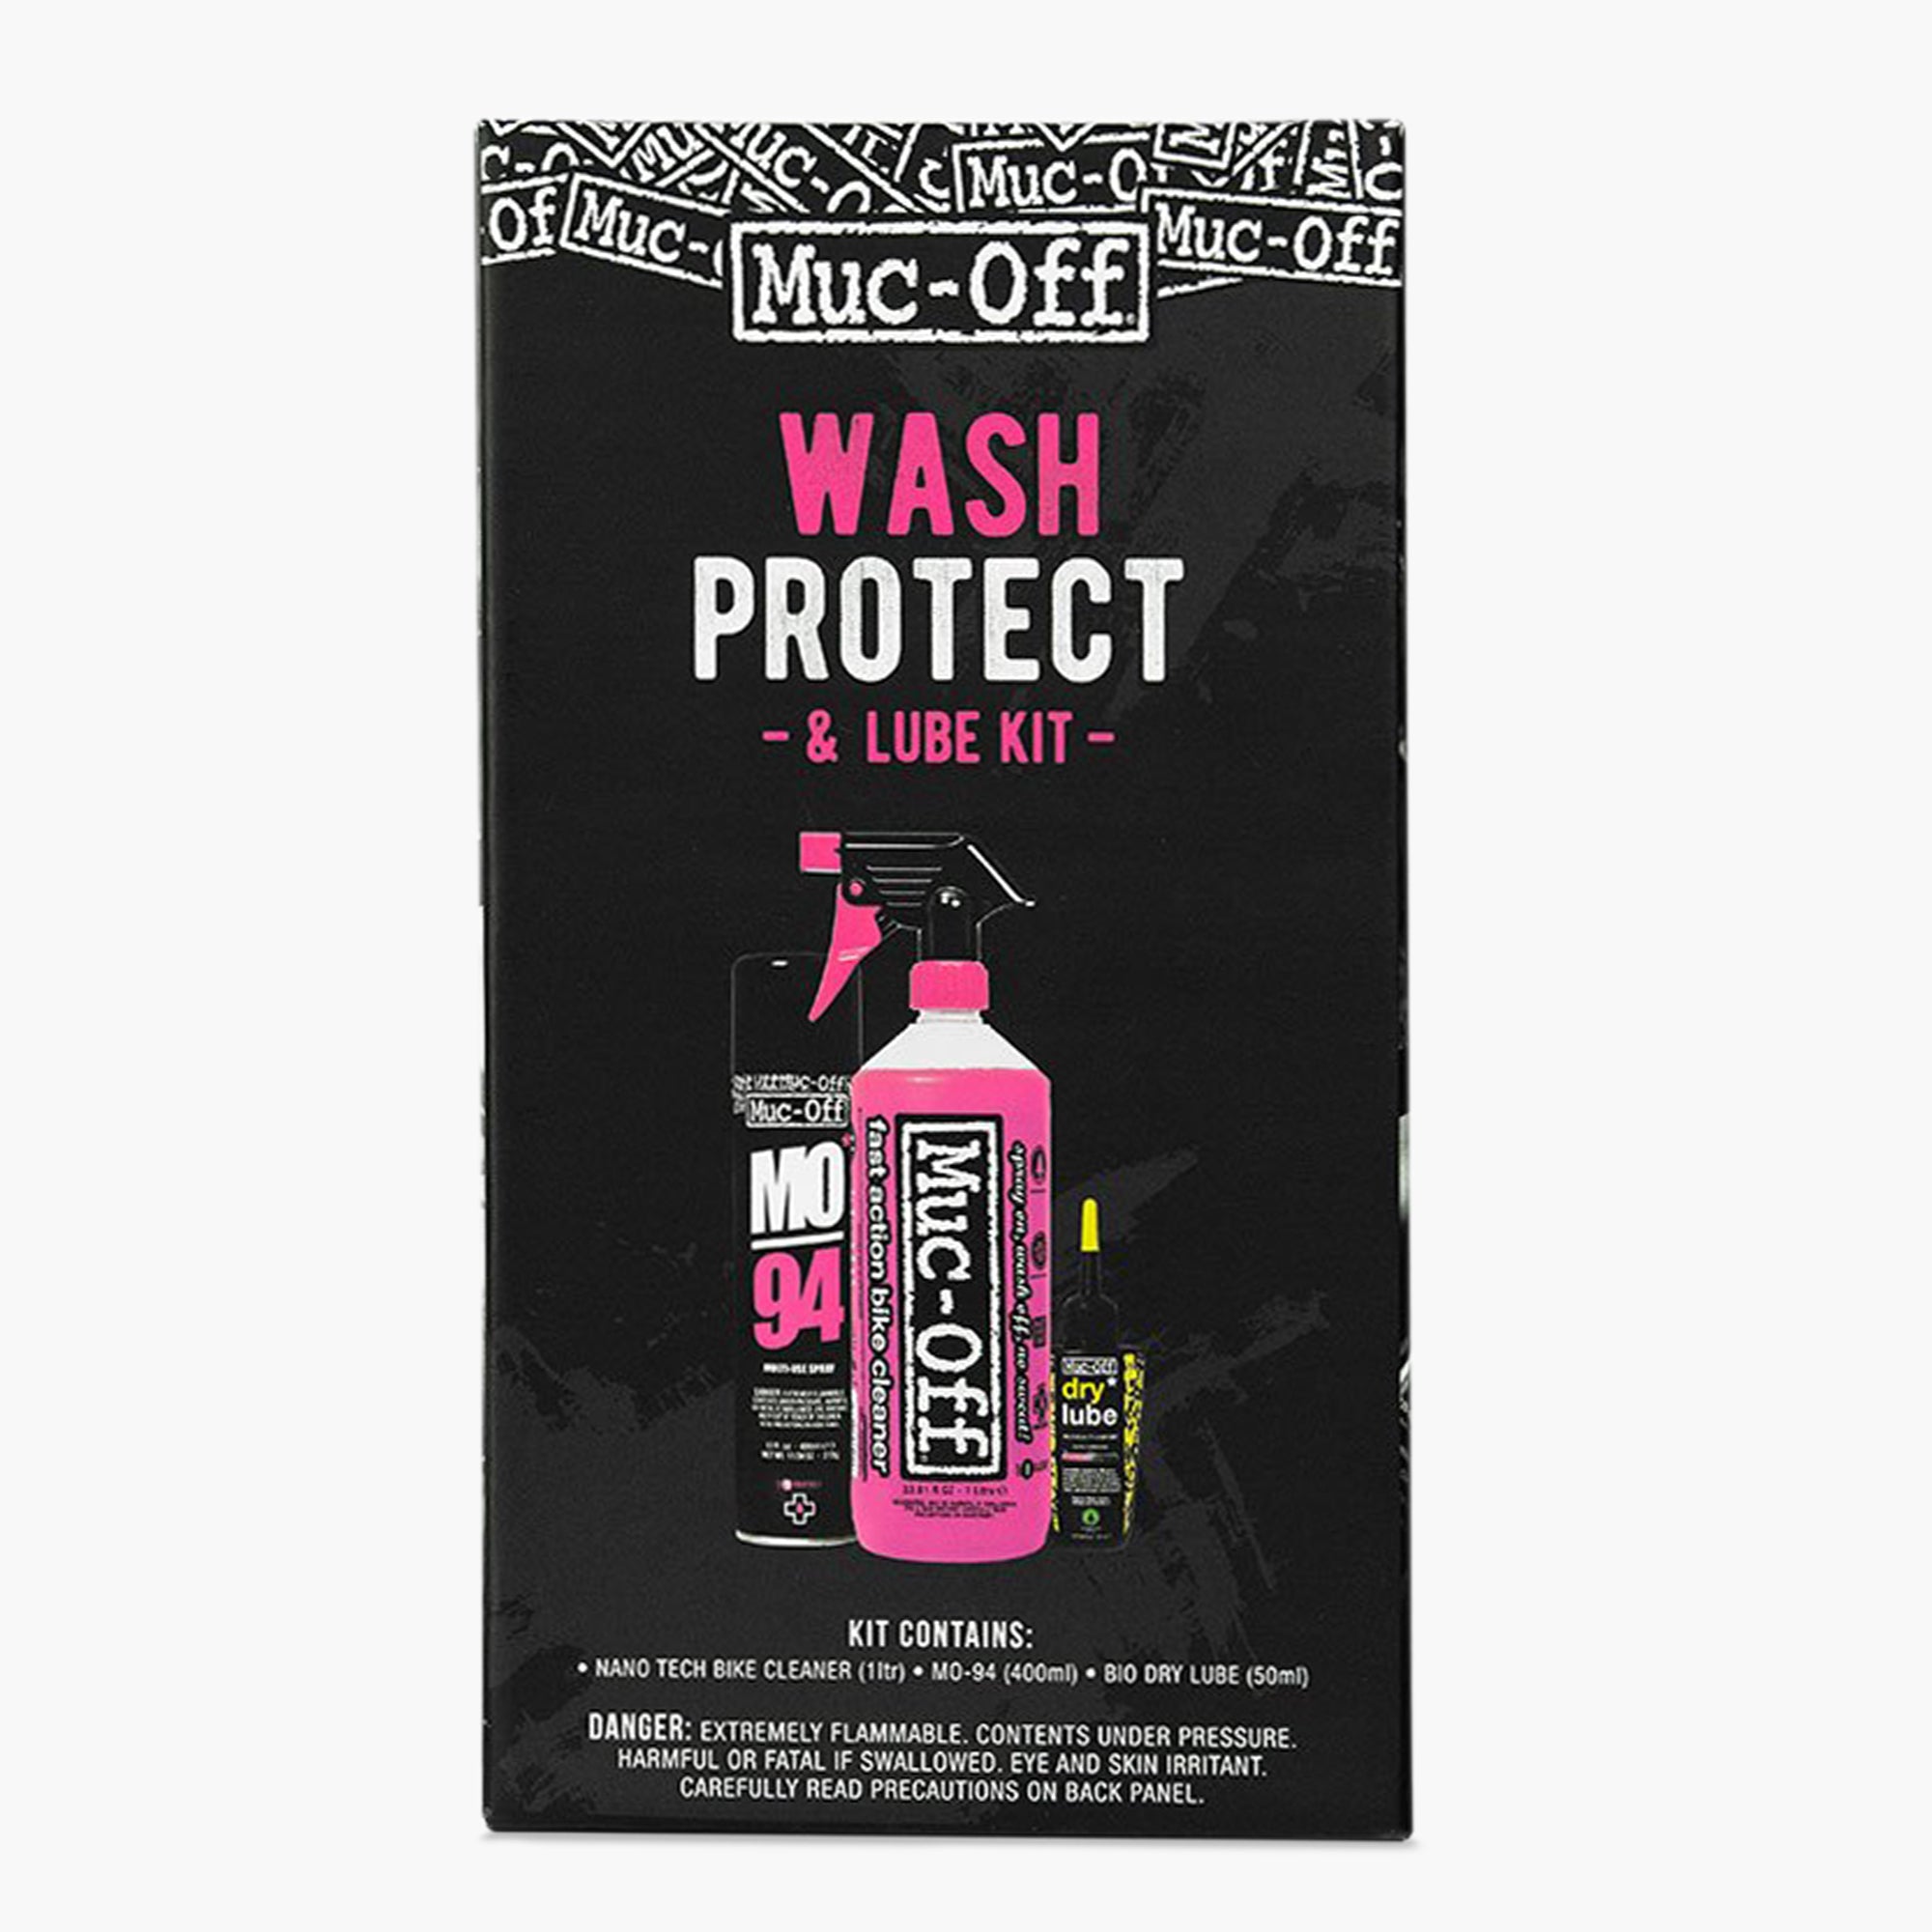  Muc-Off Ultimate Bicycle Cleaning Kit - Must-Have Kit to Clean,  Protect and Lube Your Bike - Includes Bike Cleaner, Bike Protect, Brushes  and More : Sports & Outdoors